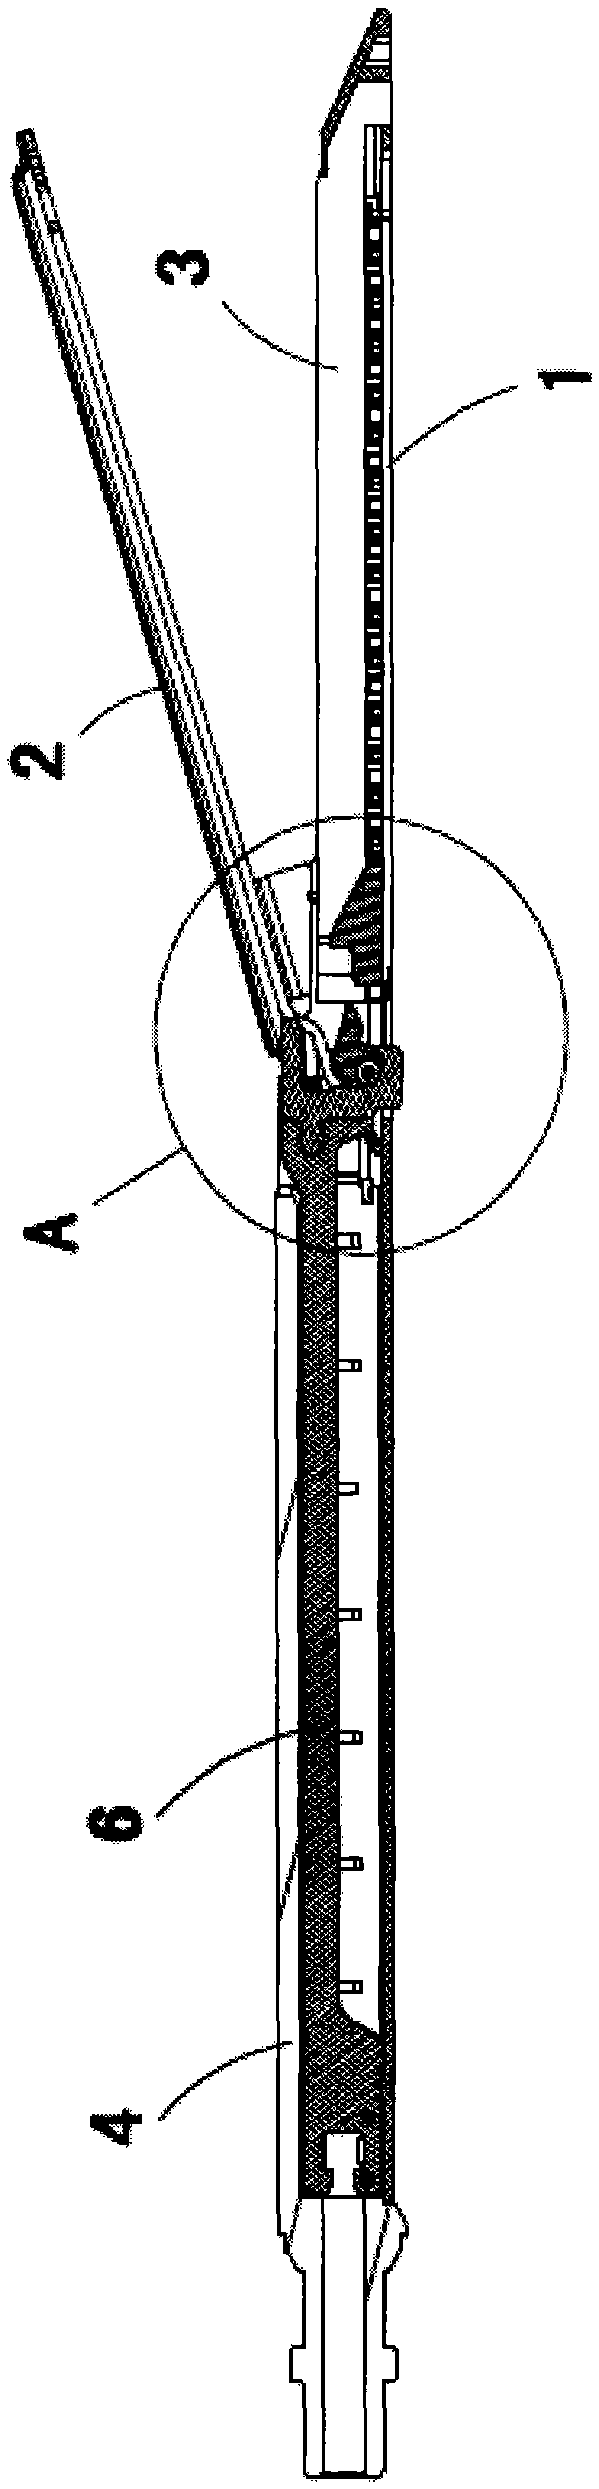 A linear suture cutting device